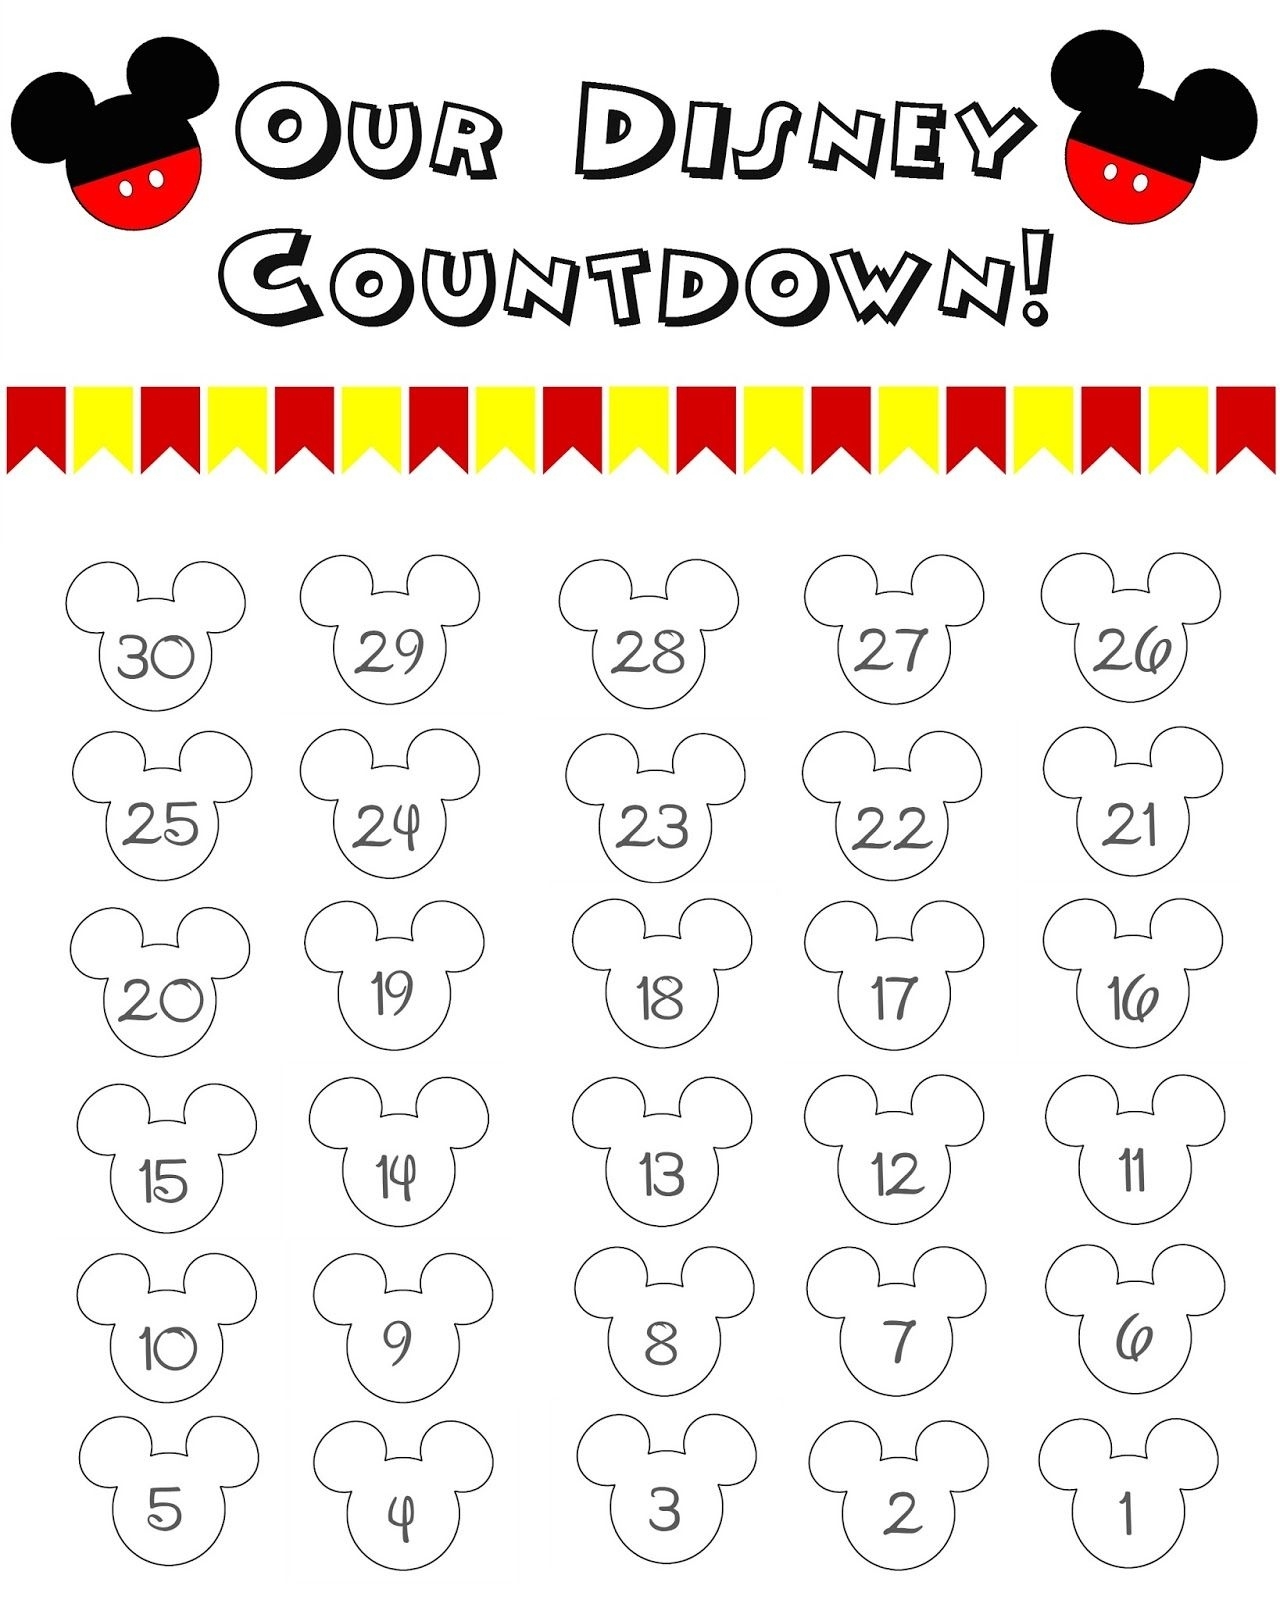 Disney World Countdown Calendar - Free Printable | The Momma Diaries Countdown Calendar With Picture